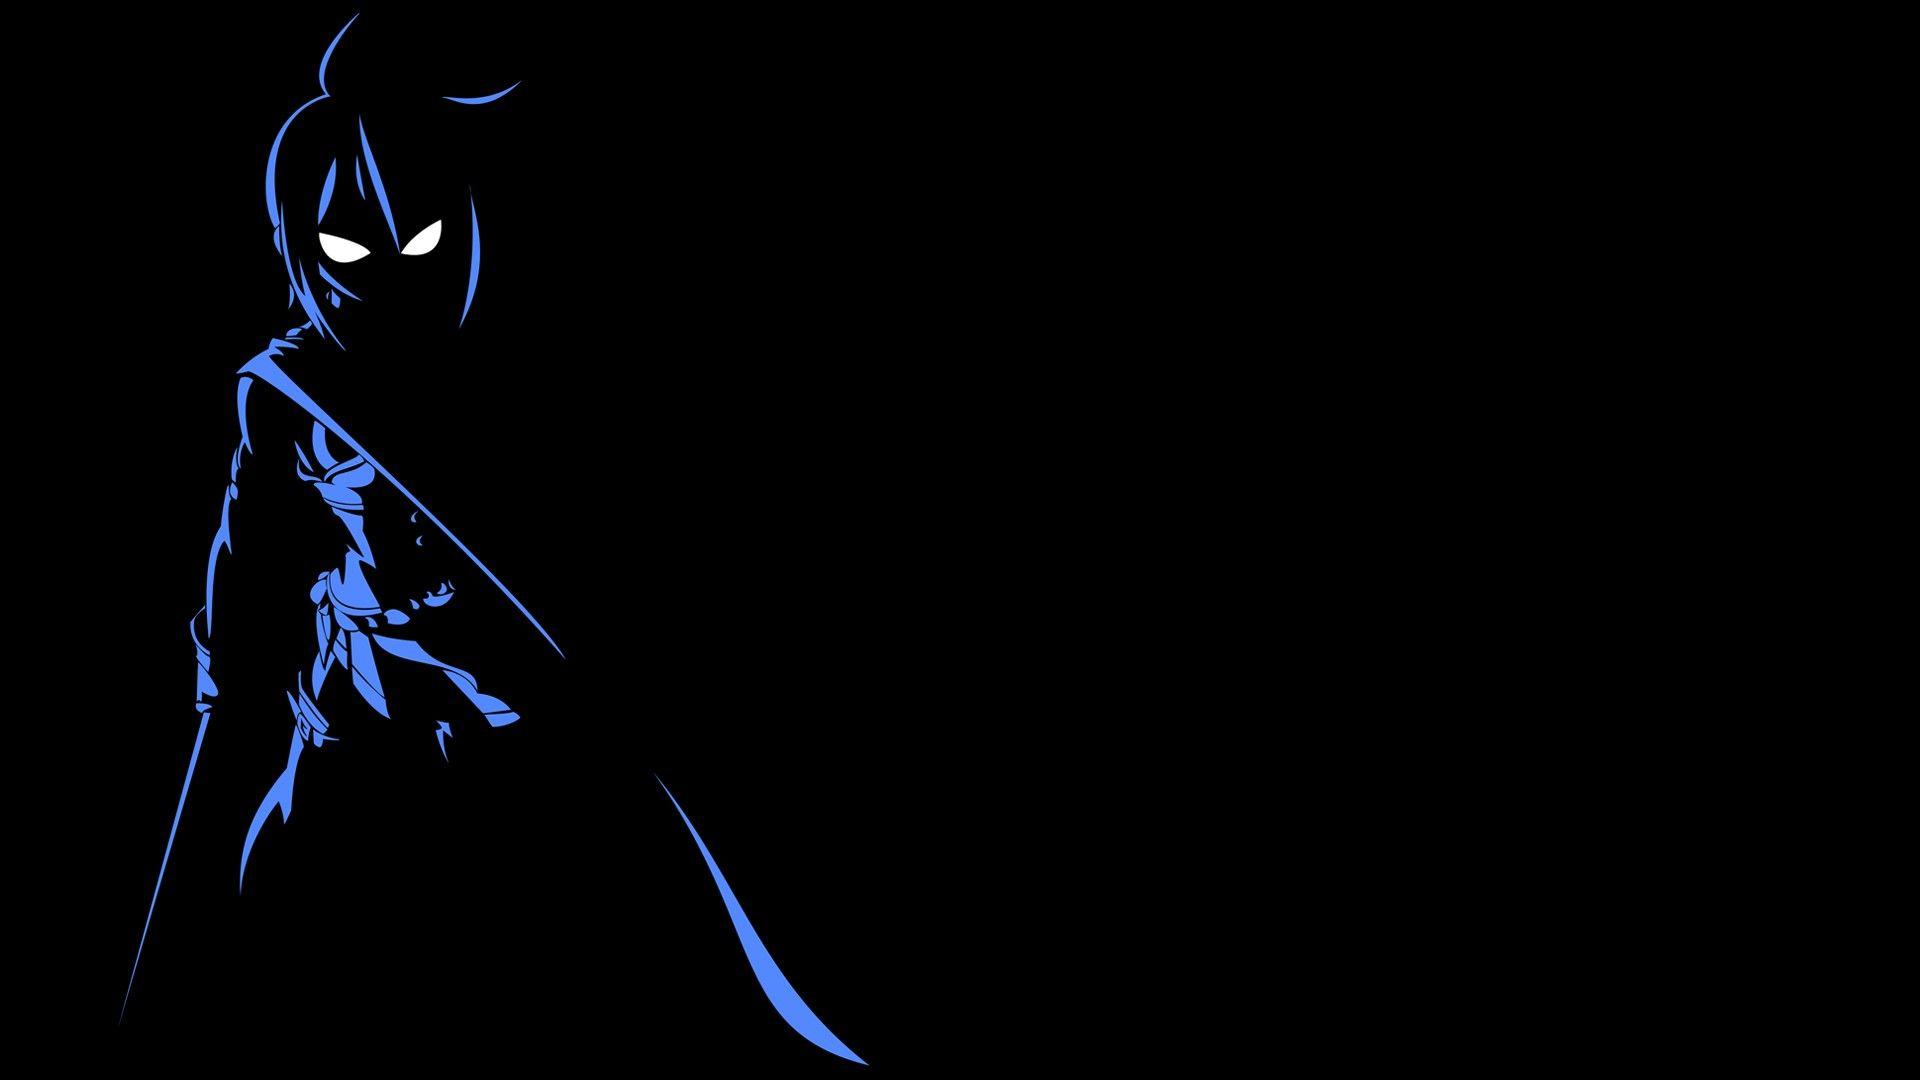 Black Anime Wallpapers - Wallpaper Cave